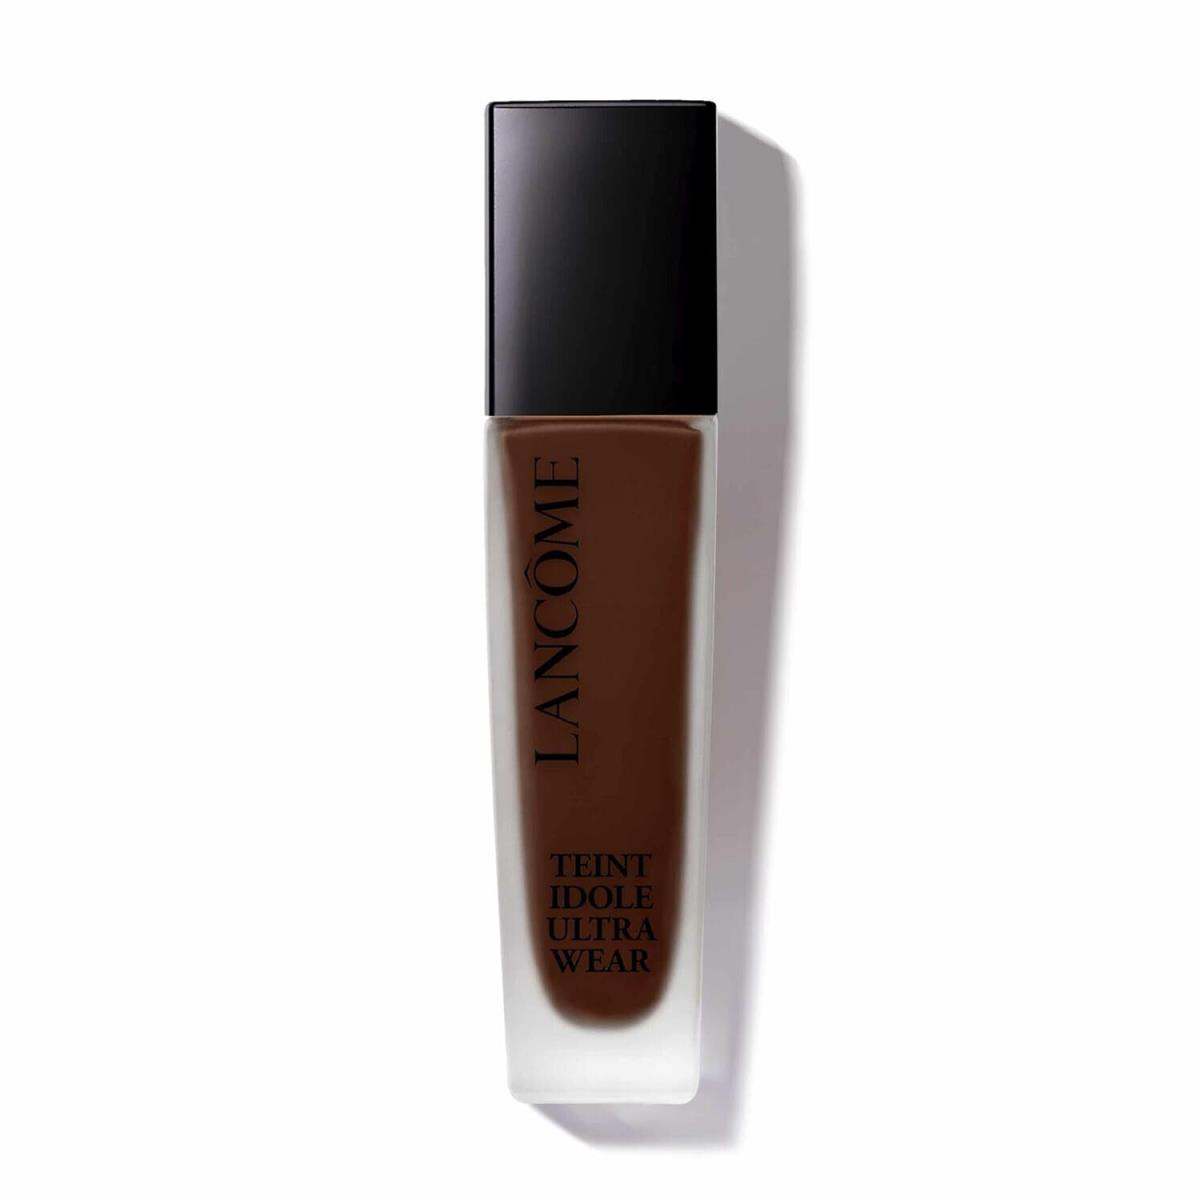 Lancome Teint Idole Ultra Wear Buildable Full Coverage Foundation 555C - 1oz